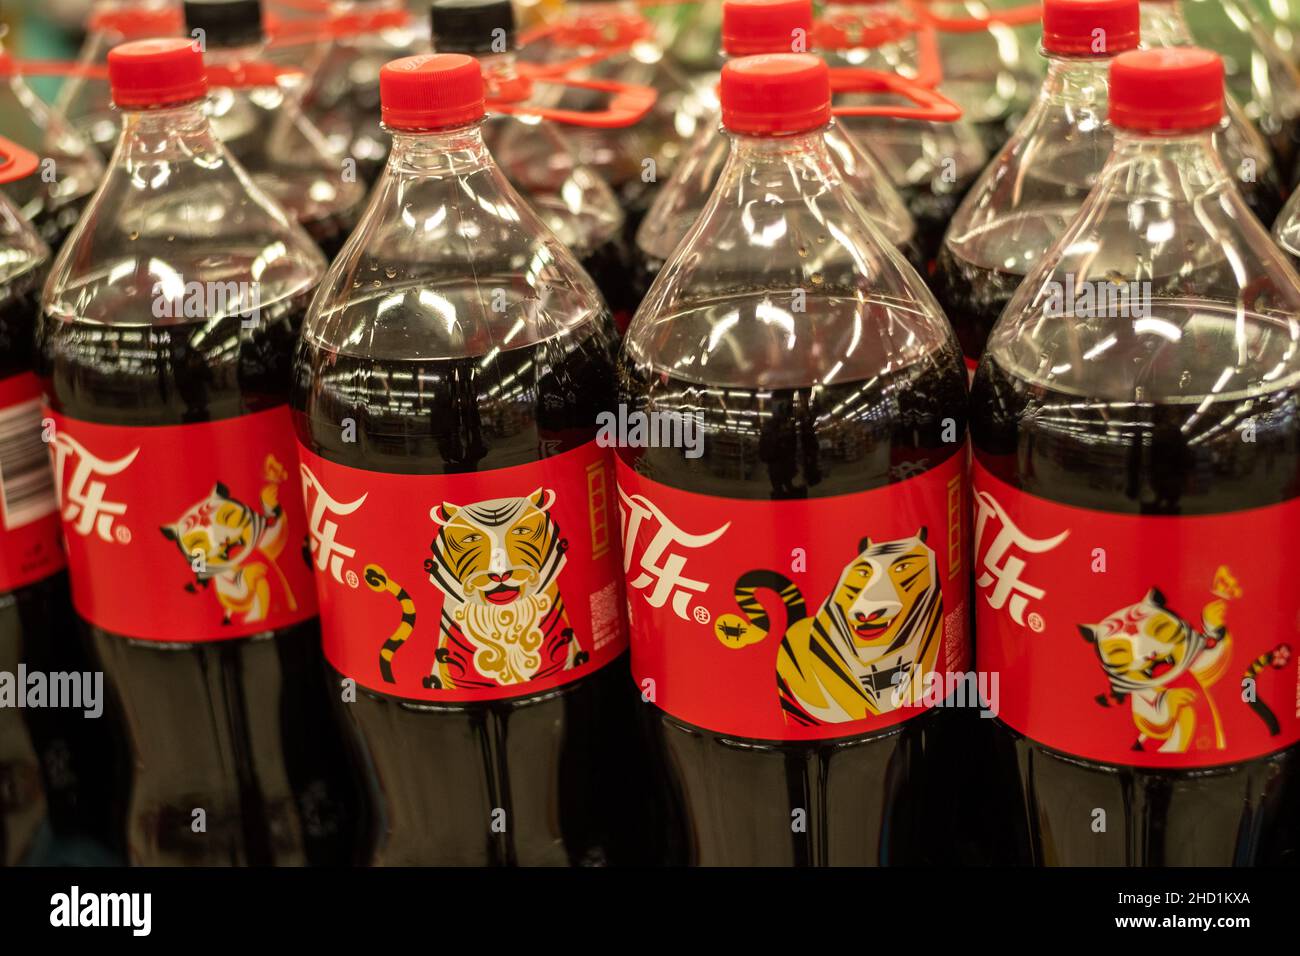 Coca-Cola bottles for the Year of the Tiger are sold at a supermarket in Beijing, China. 02-Jan-2022 Stock Photo